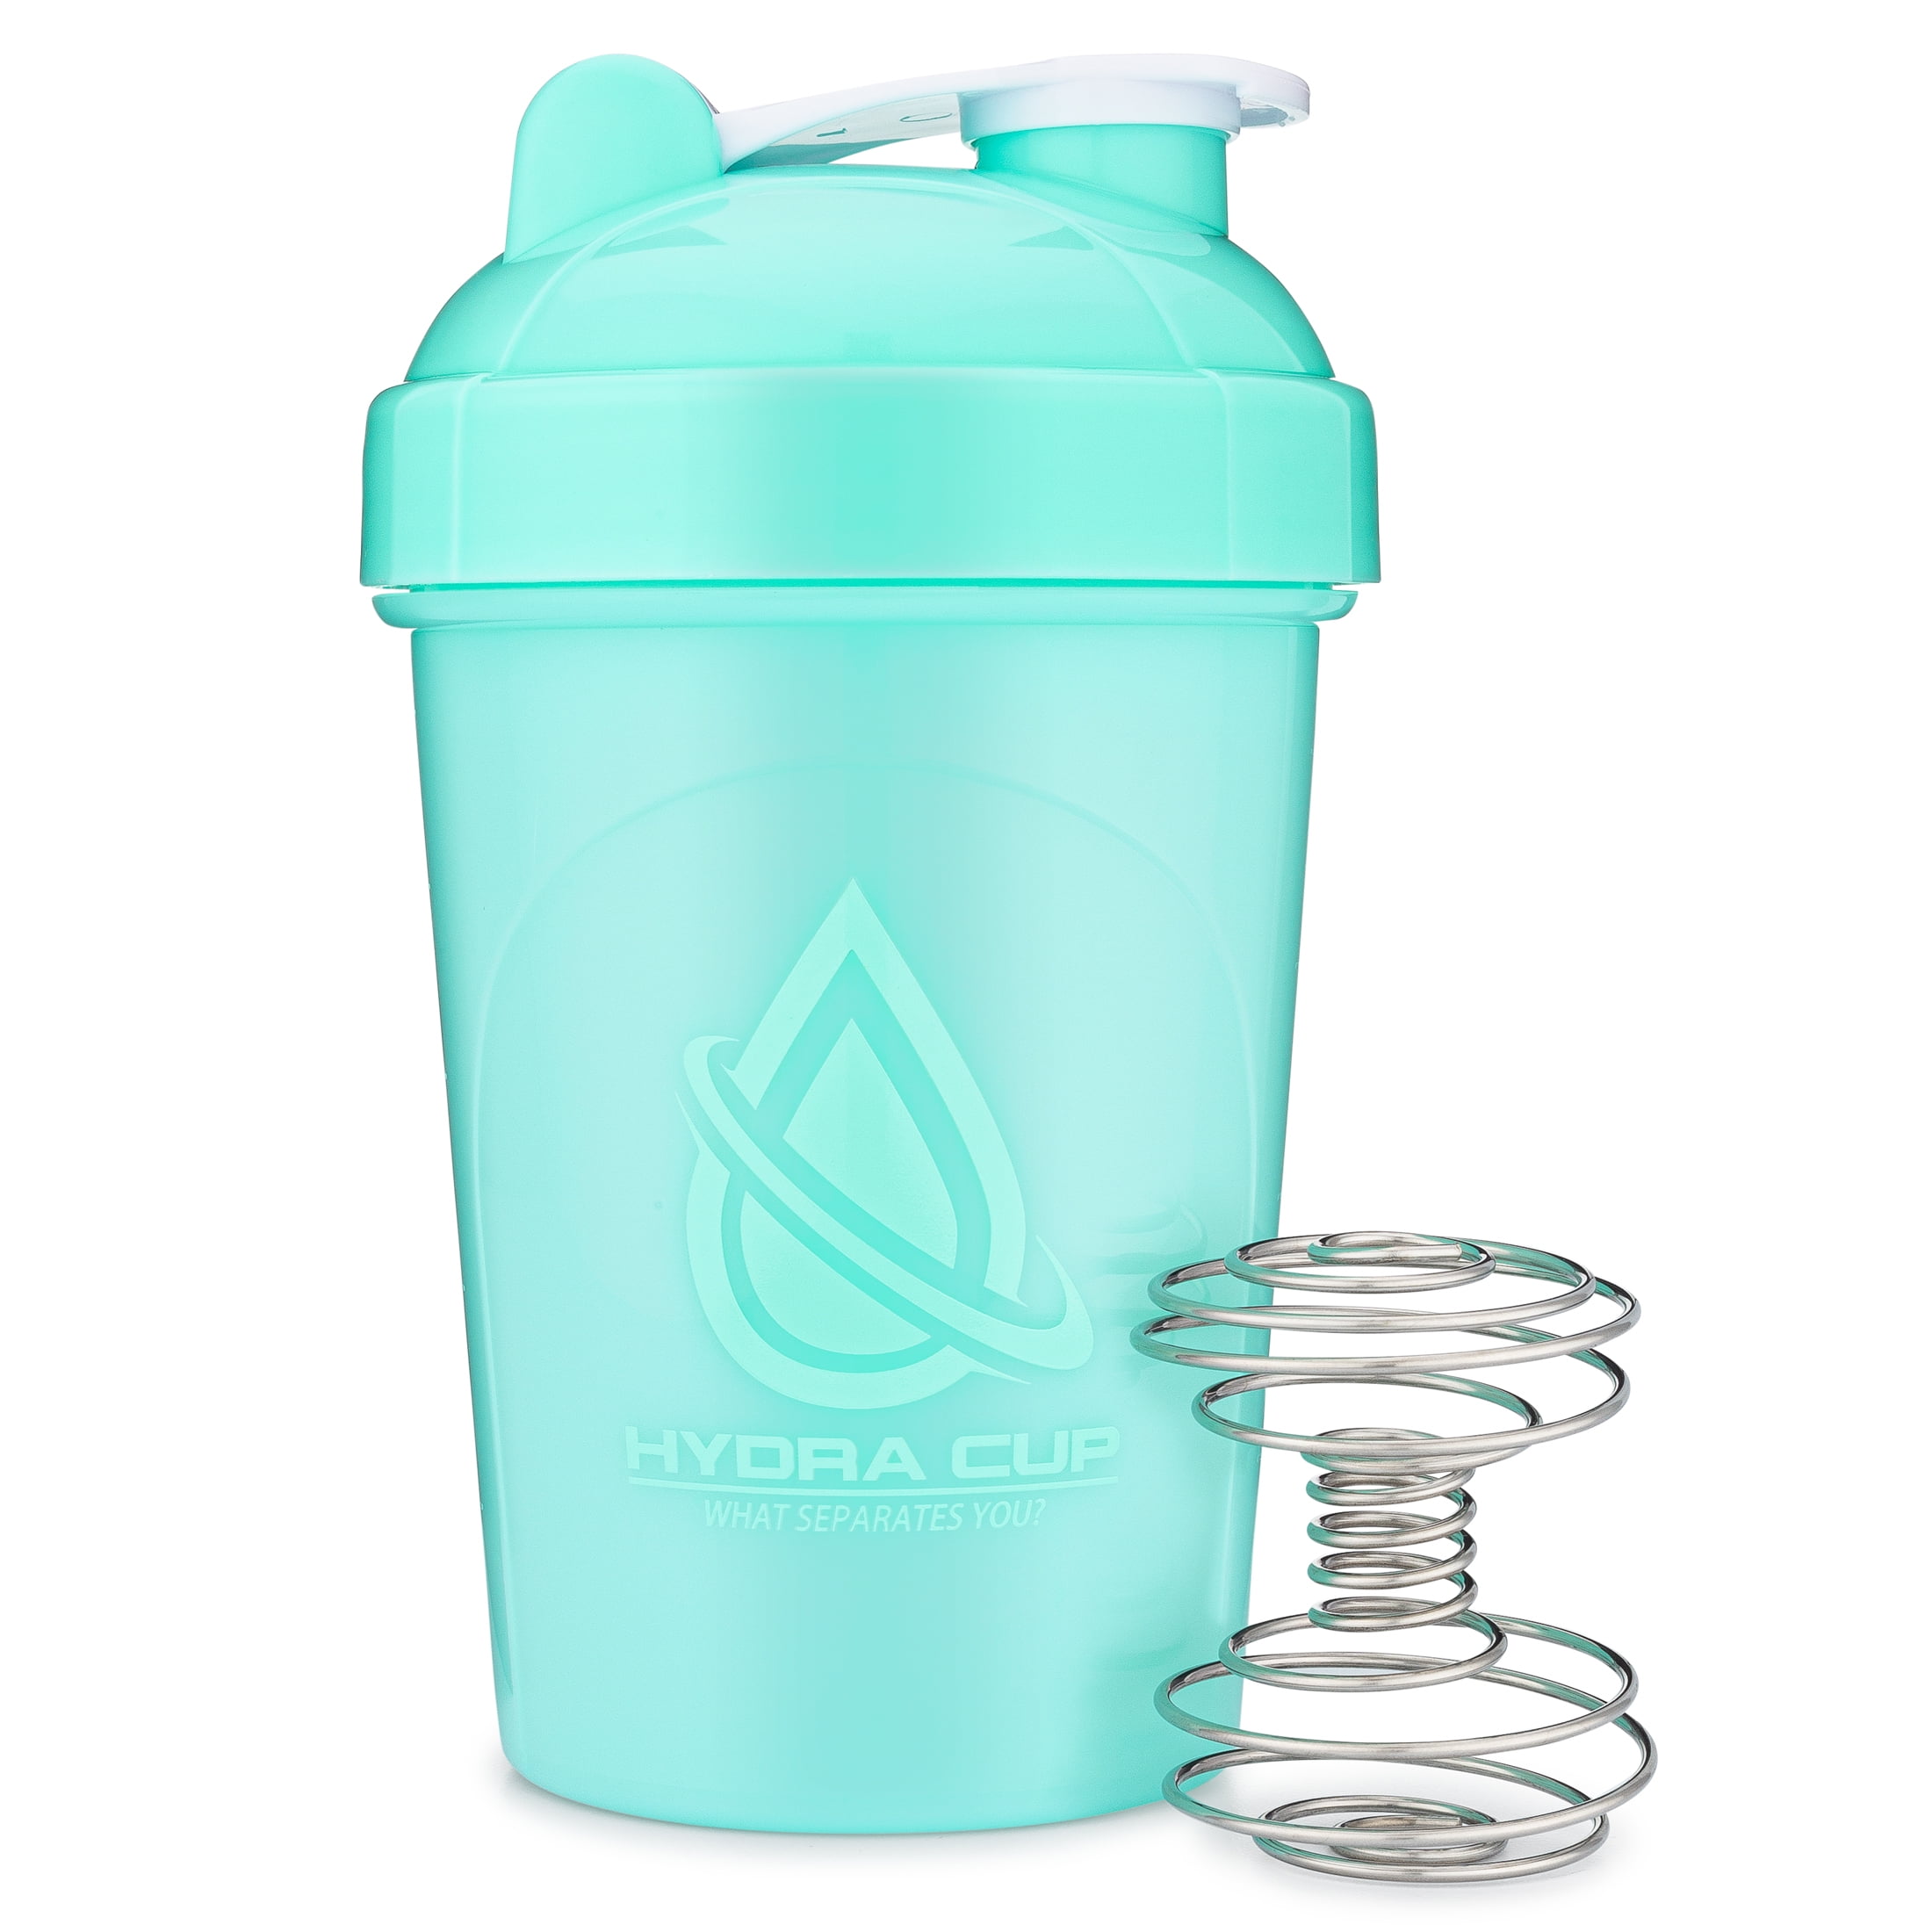 Hydra Cup [4 PACK] - Protein Powder Funnel w/ three compartments